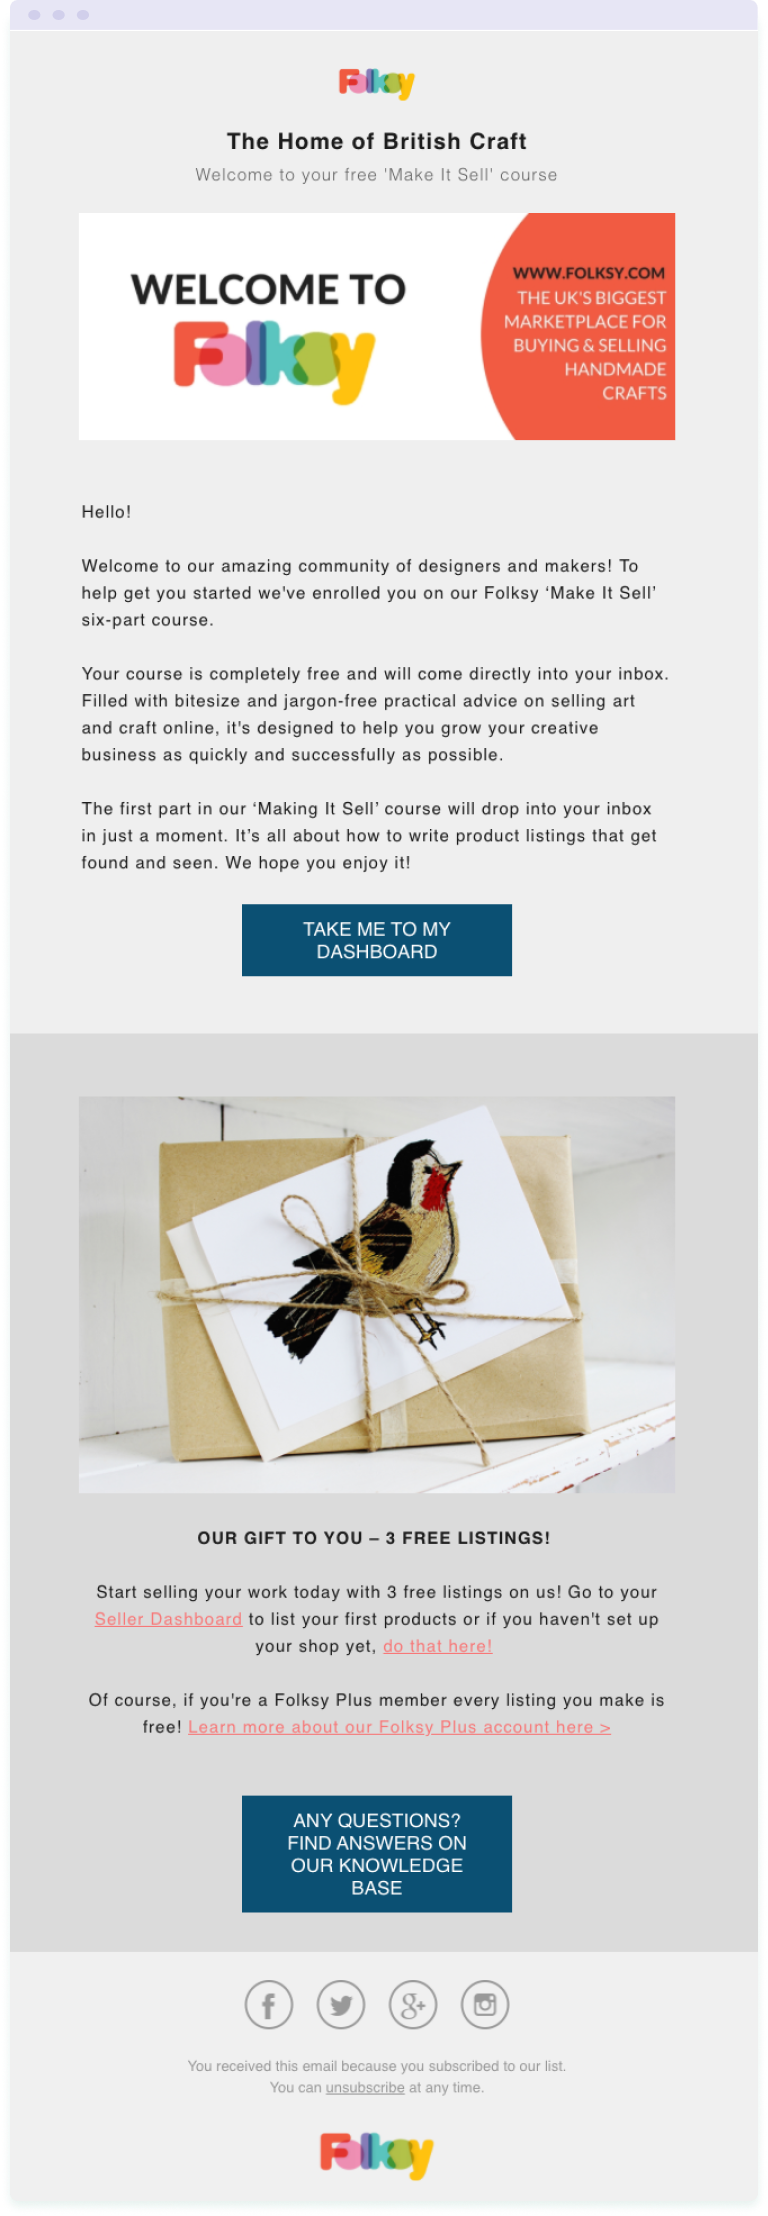 Example of a welcome email from Folksy